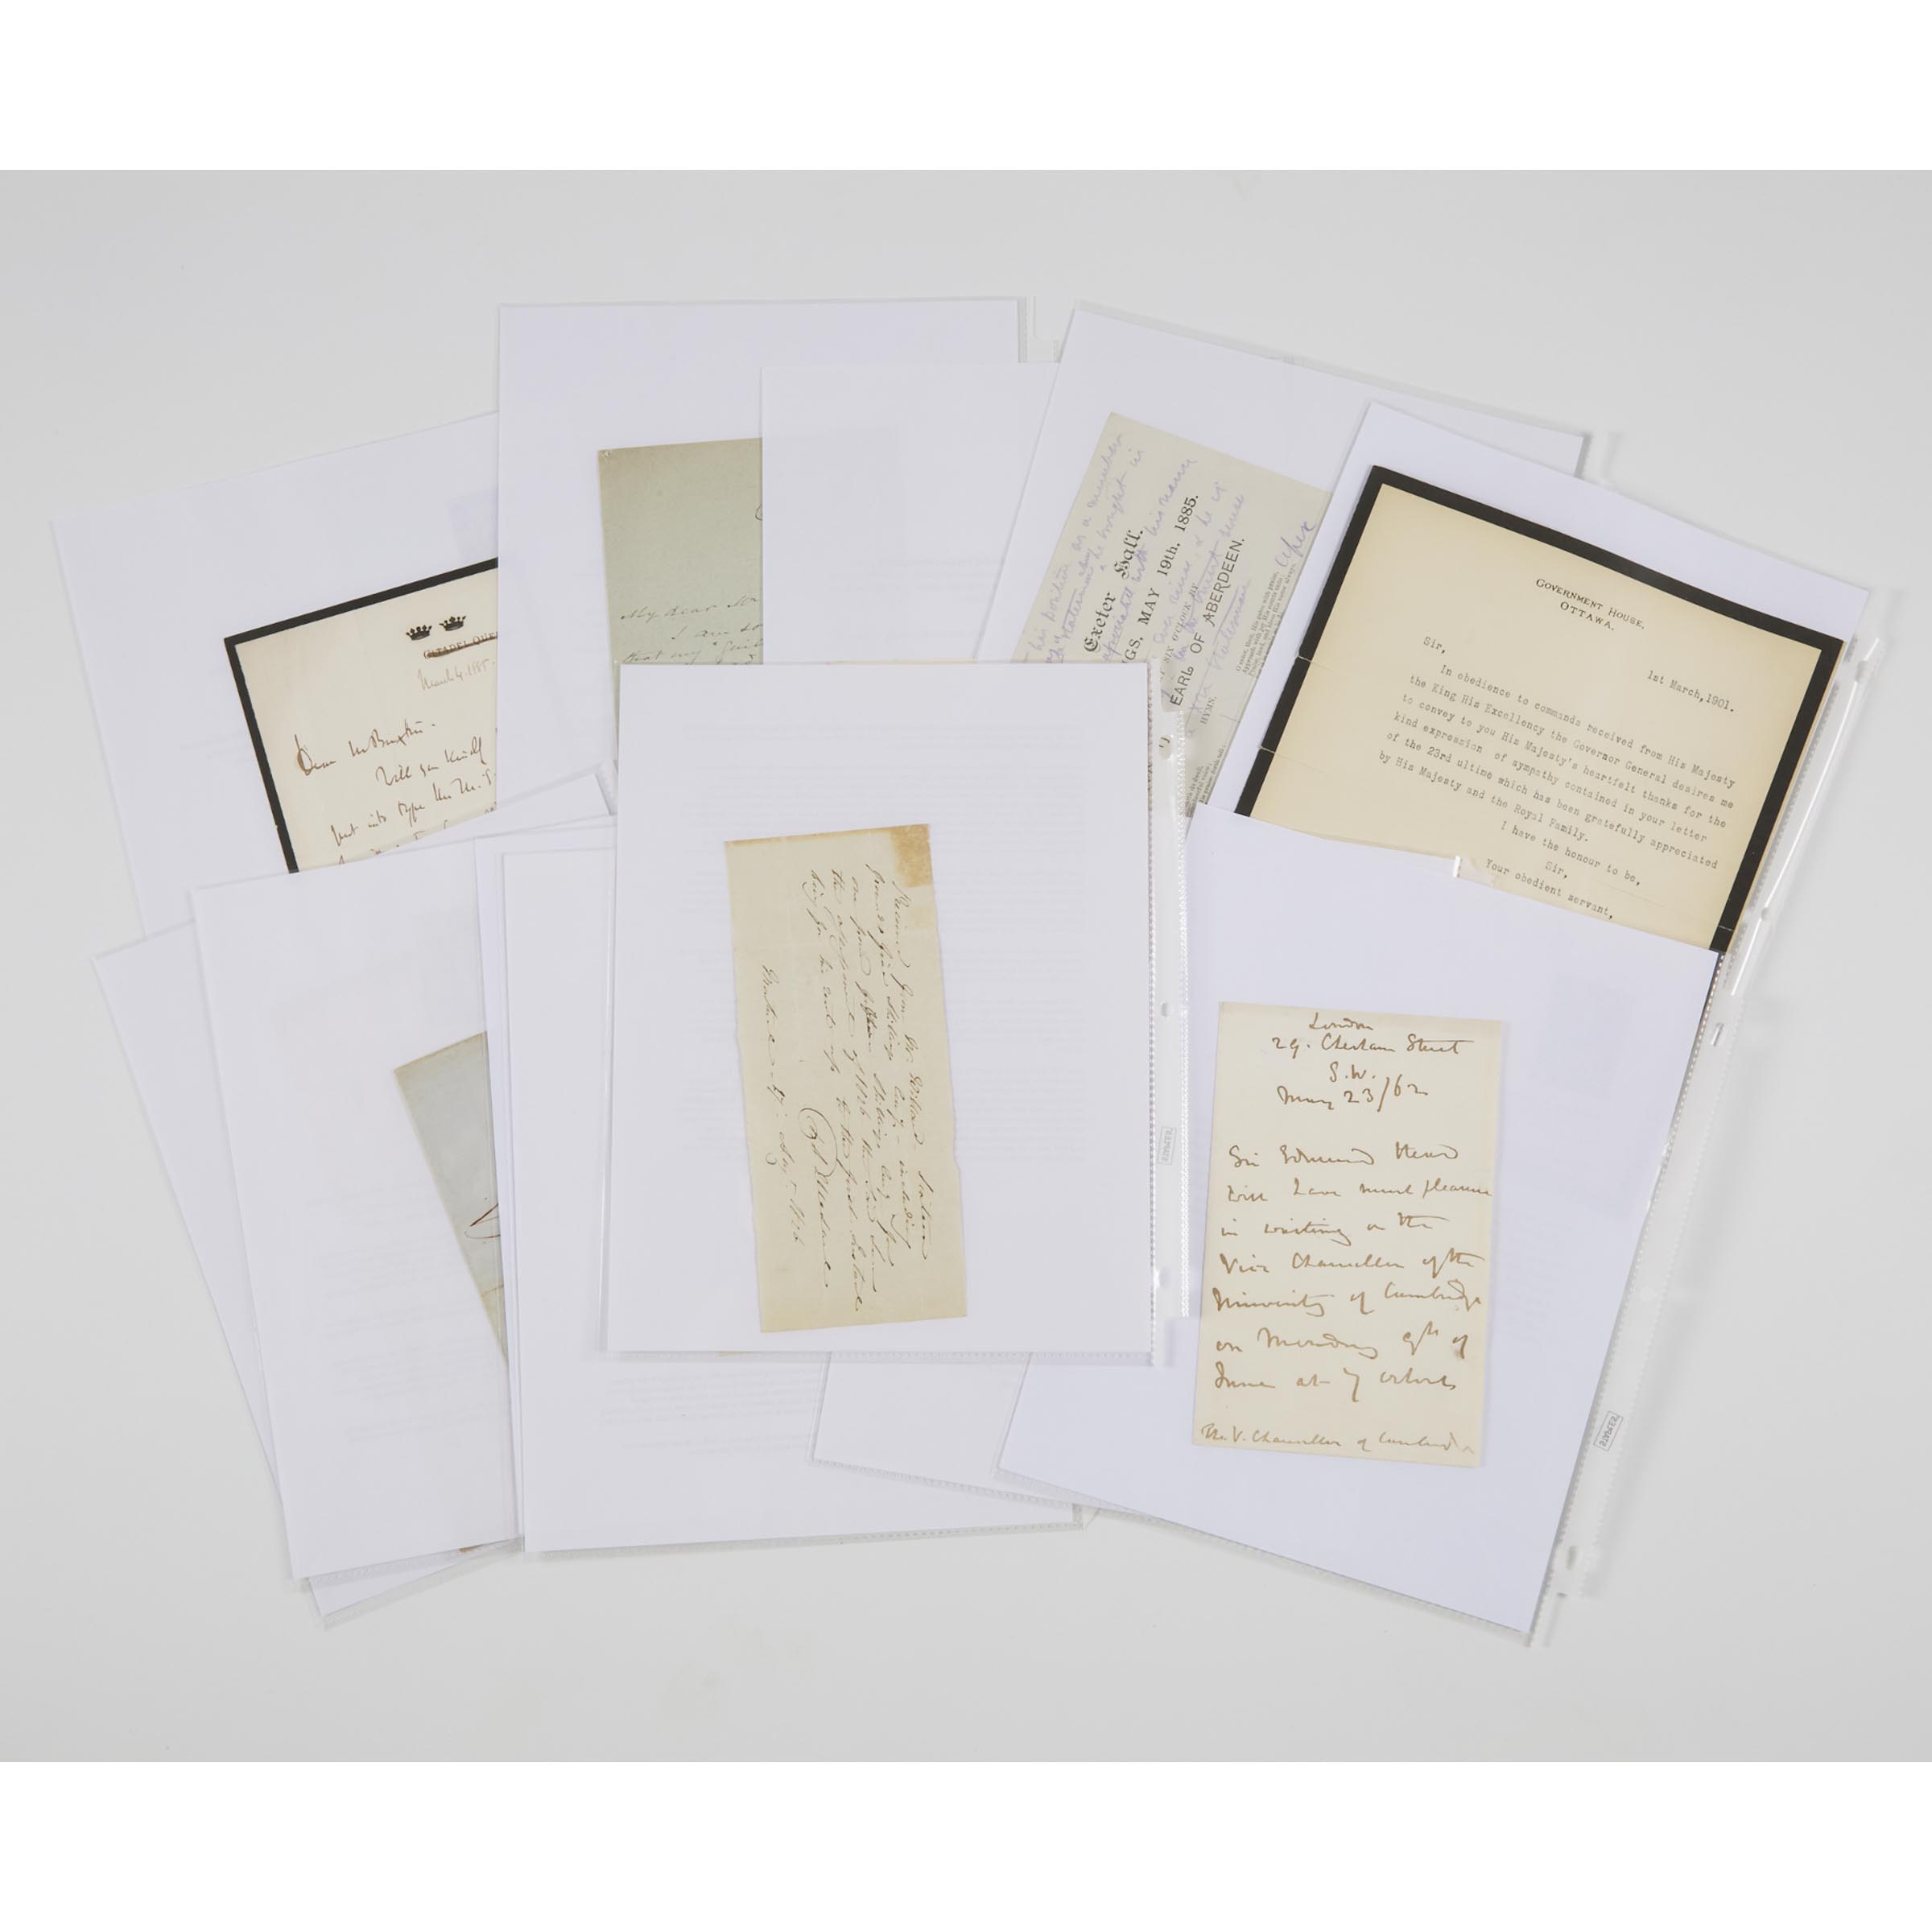 12 Miscellaneous Documents Signed by Various Canadian Historical Figures, 18th, 19th and early 20th centuries